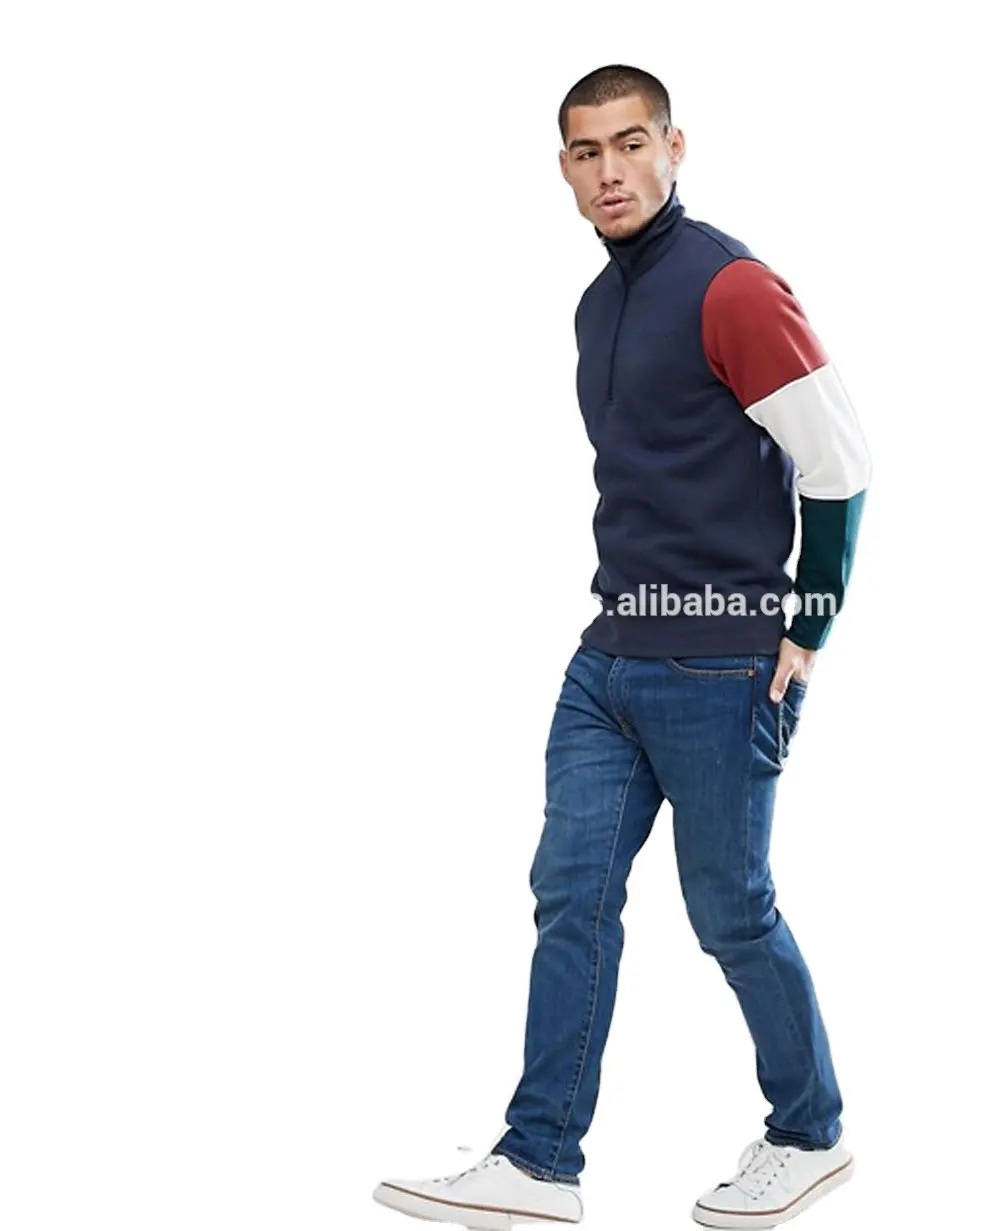 New Bulk Wholesale High Quality Cheap Price Men's Pullover Oversize Custom Sweatshirts Blank with Long line